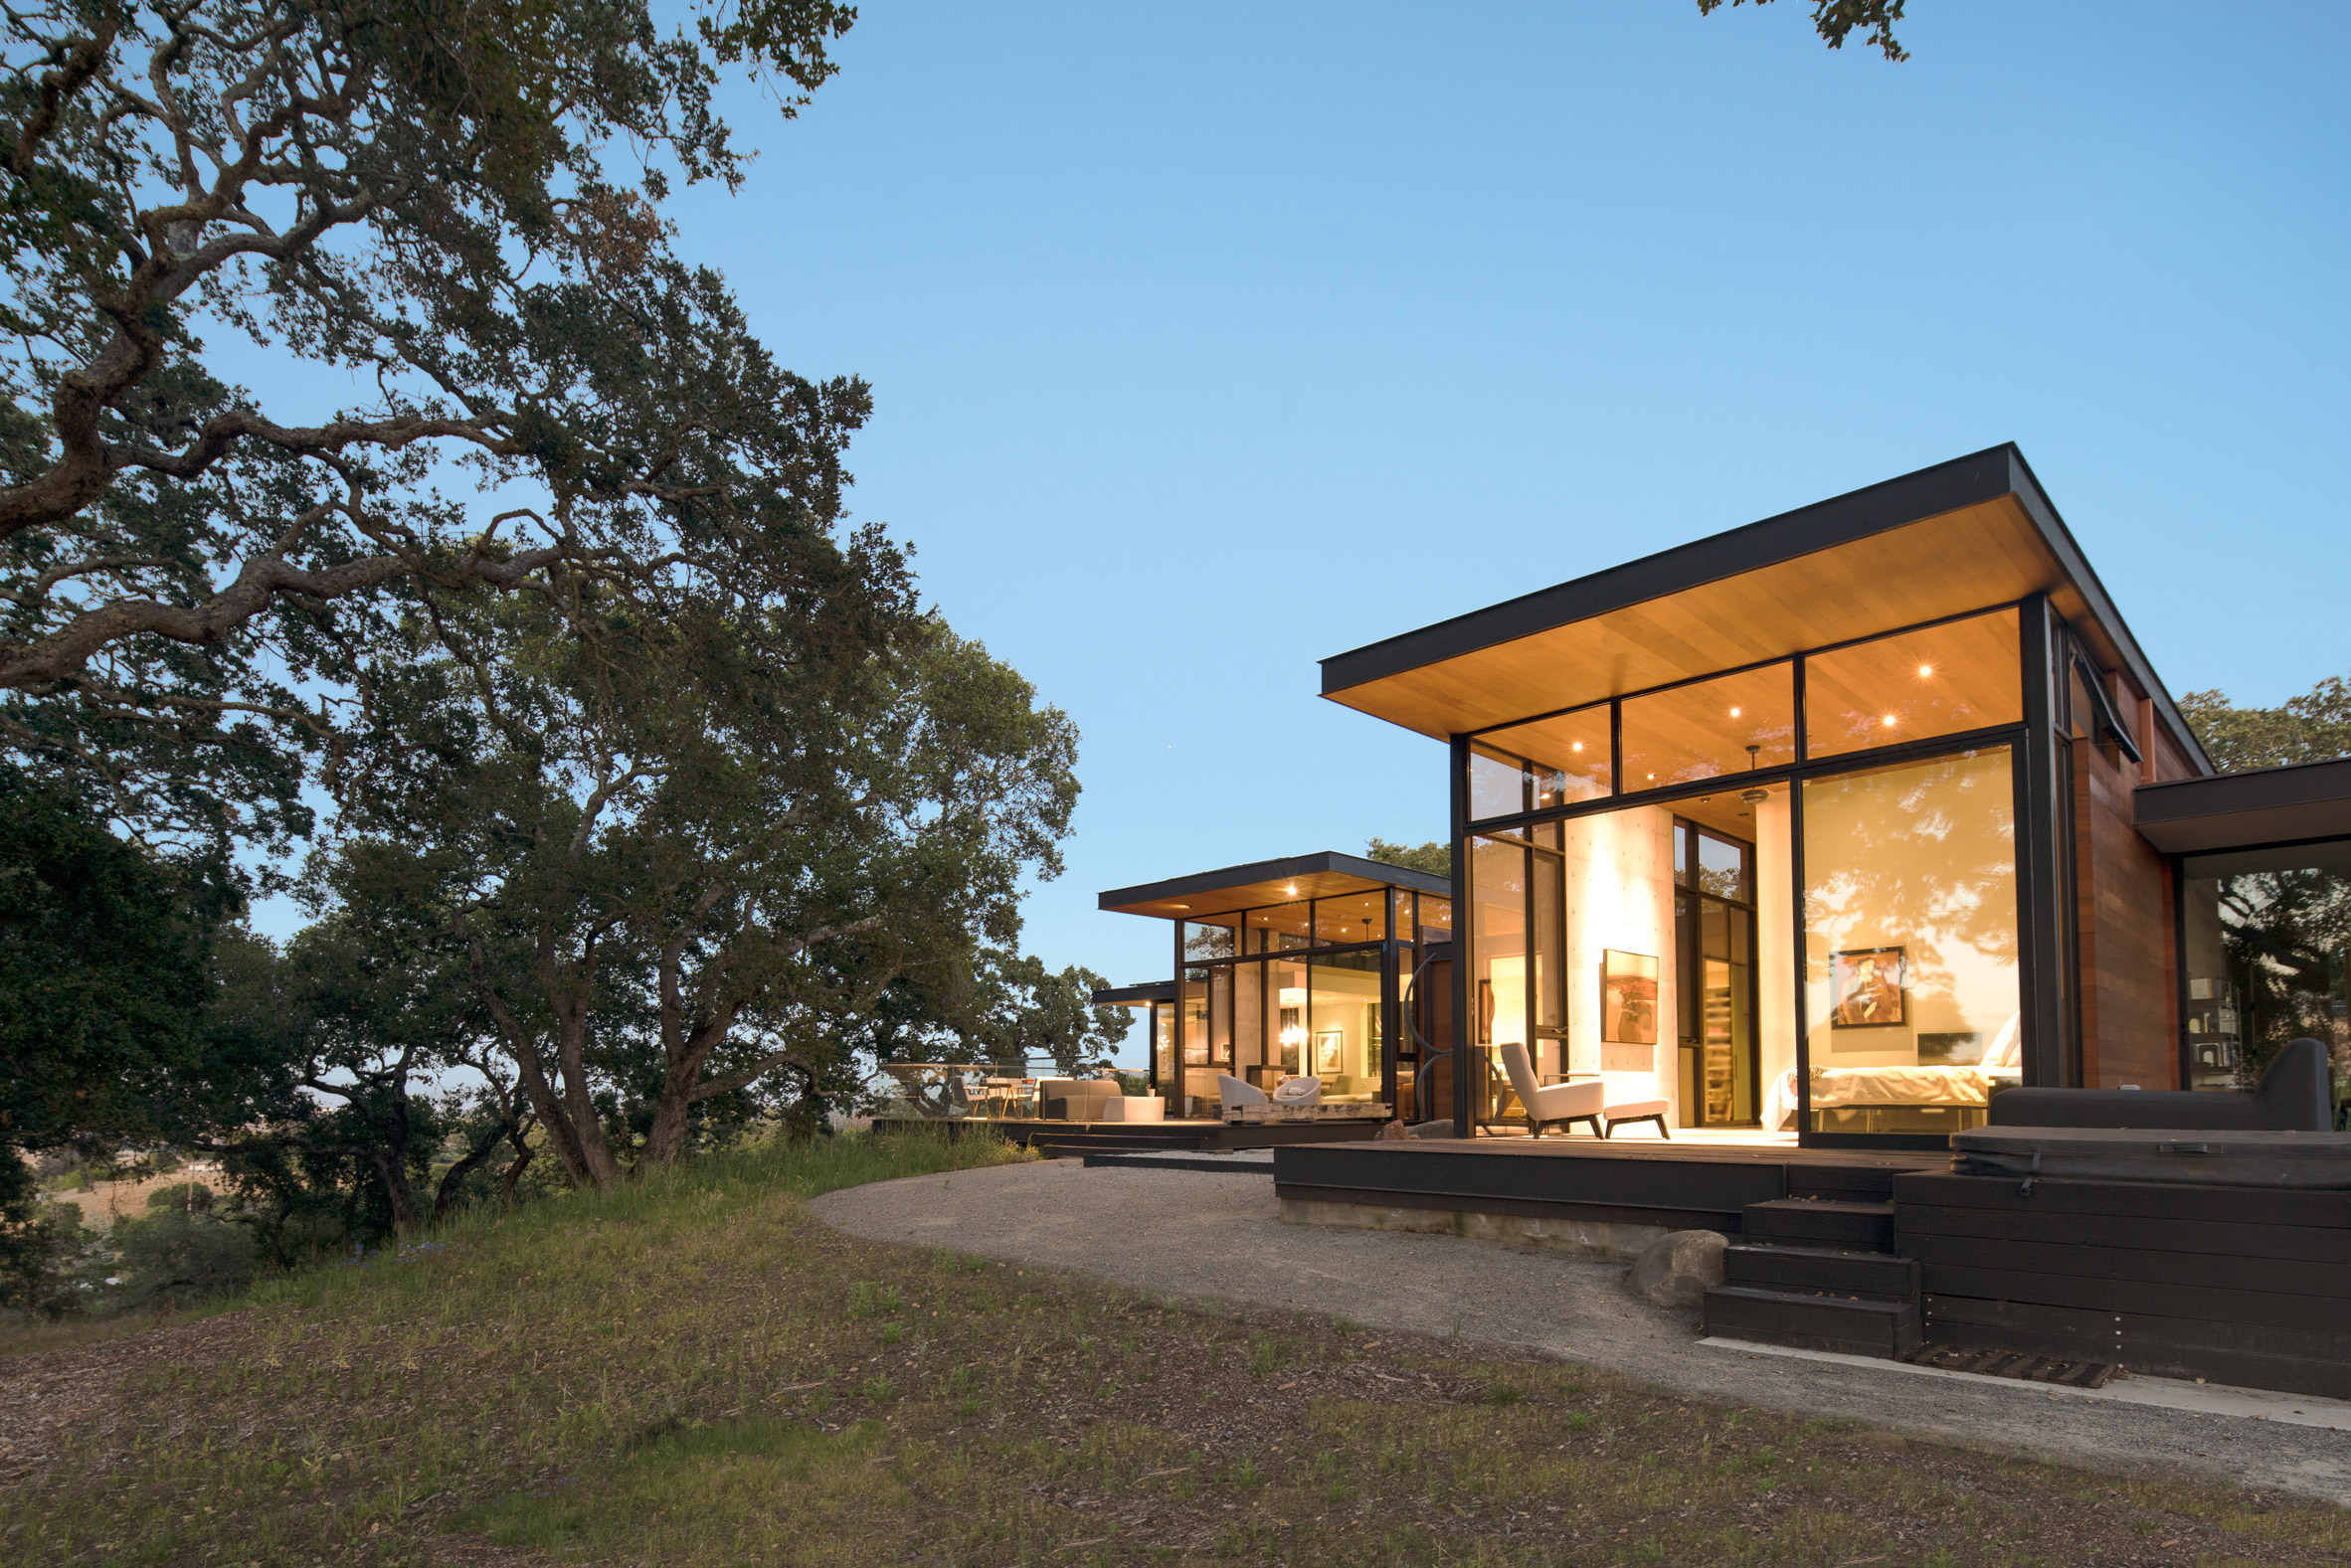 Oak trees inform design of northern California home by Field Architecture